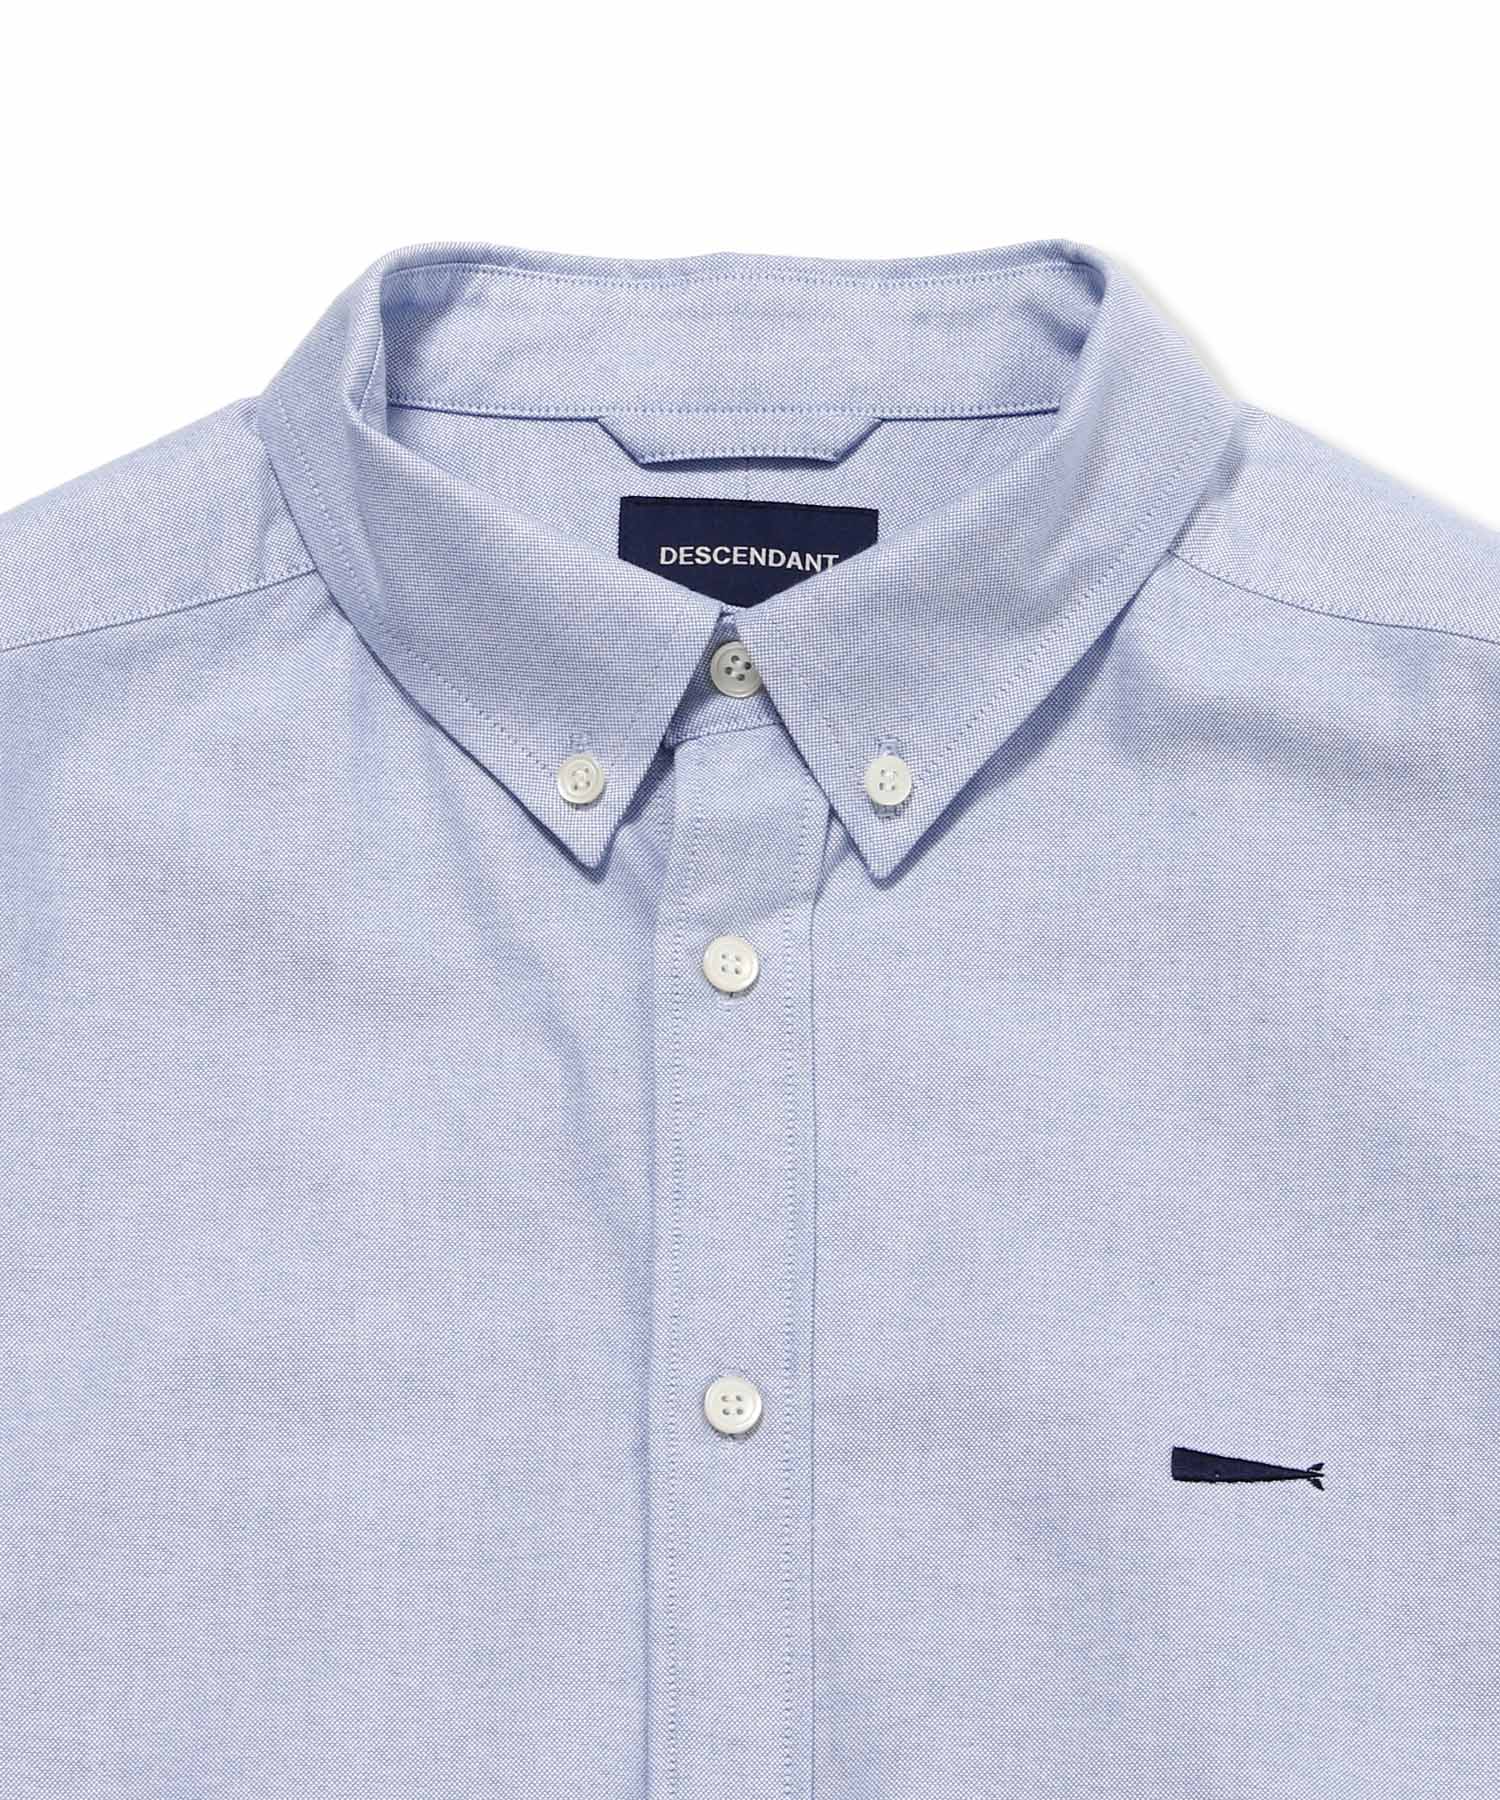 Kennedy's Oxford Ls Shirt - DESCENDANT (ディセンダント) - tops 